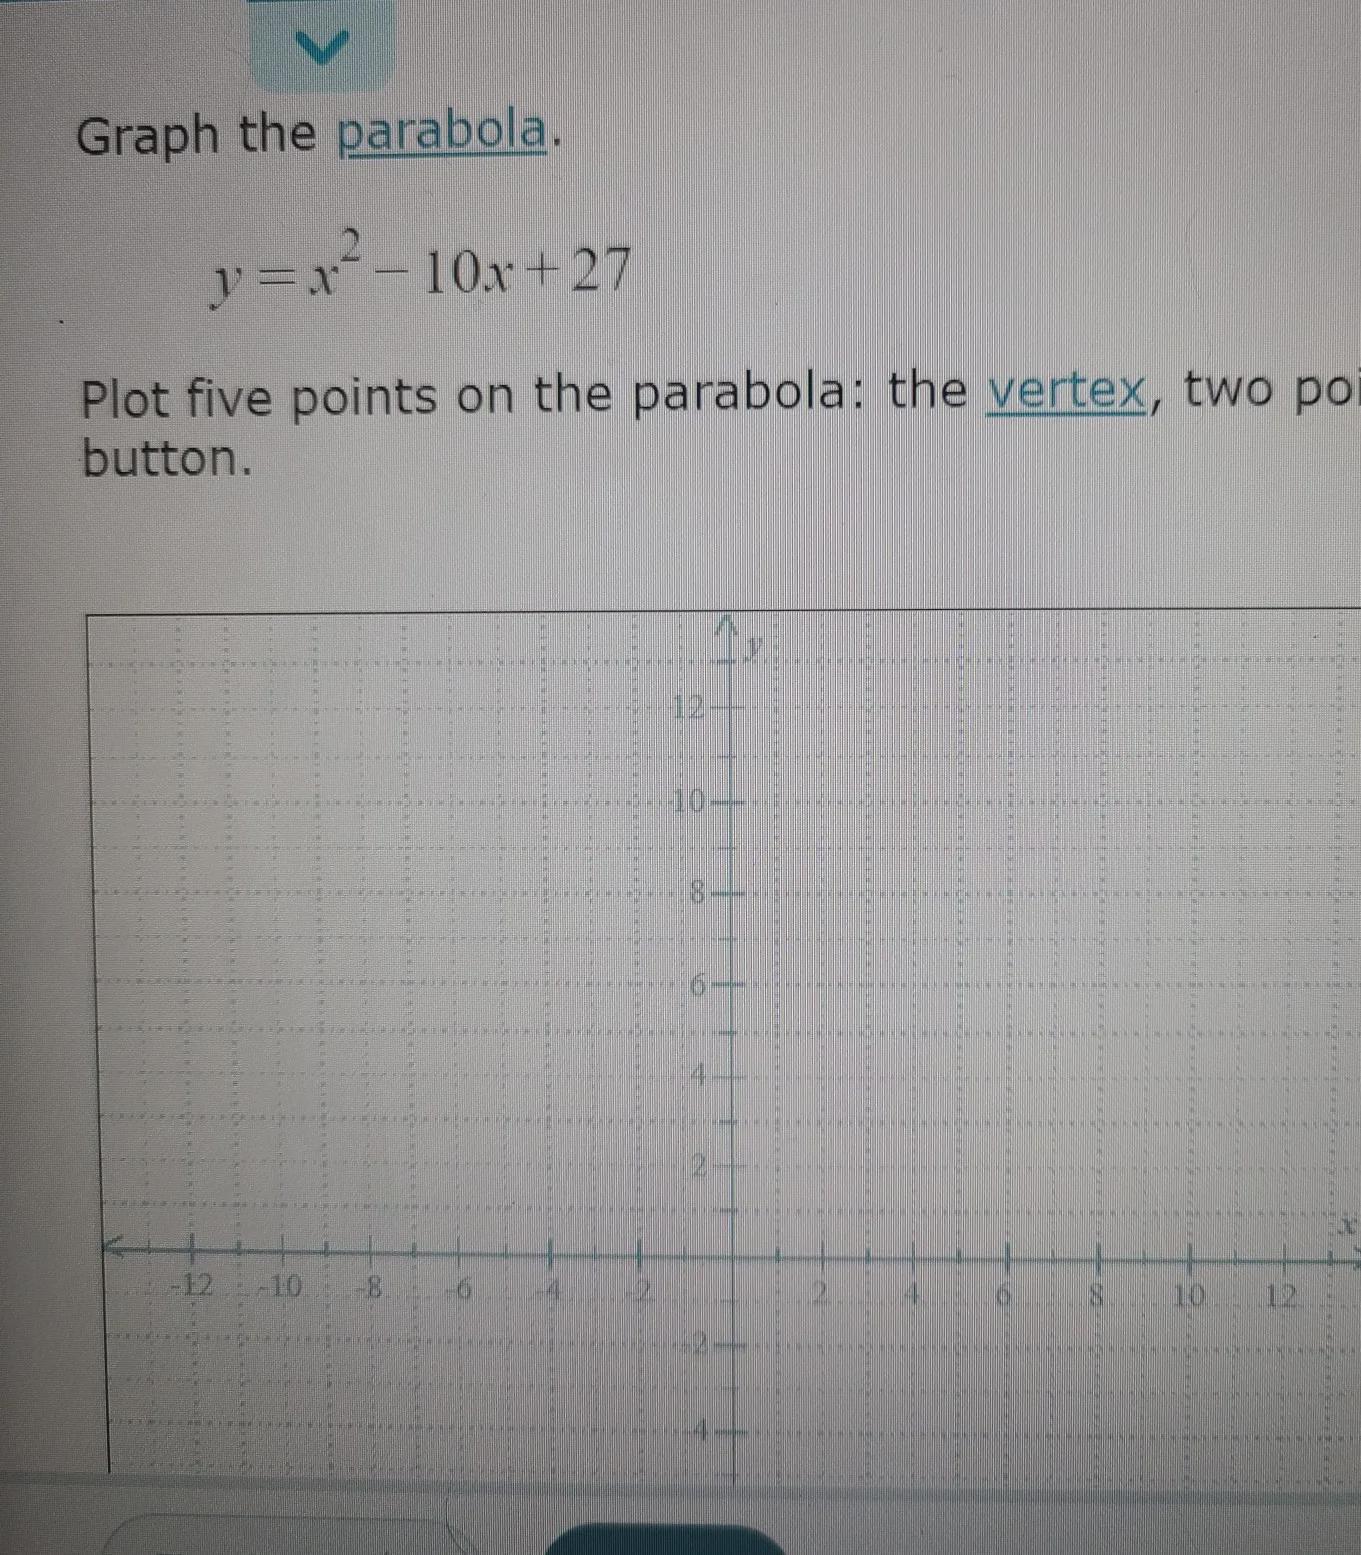 I Need 5 Points. The Vertex, 2 To The Left, And 2 To The Right